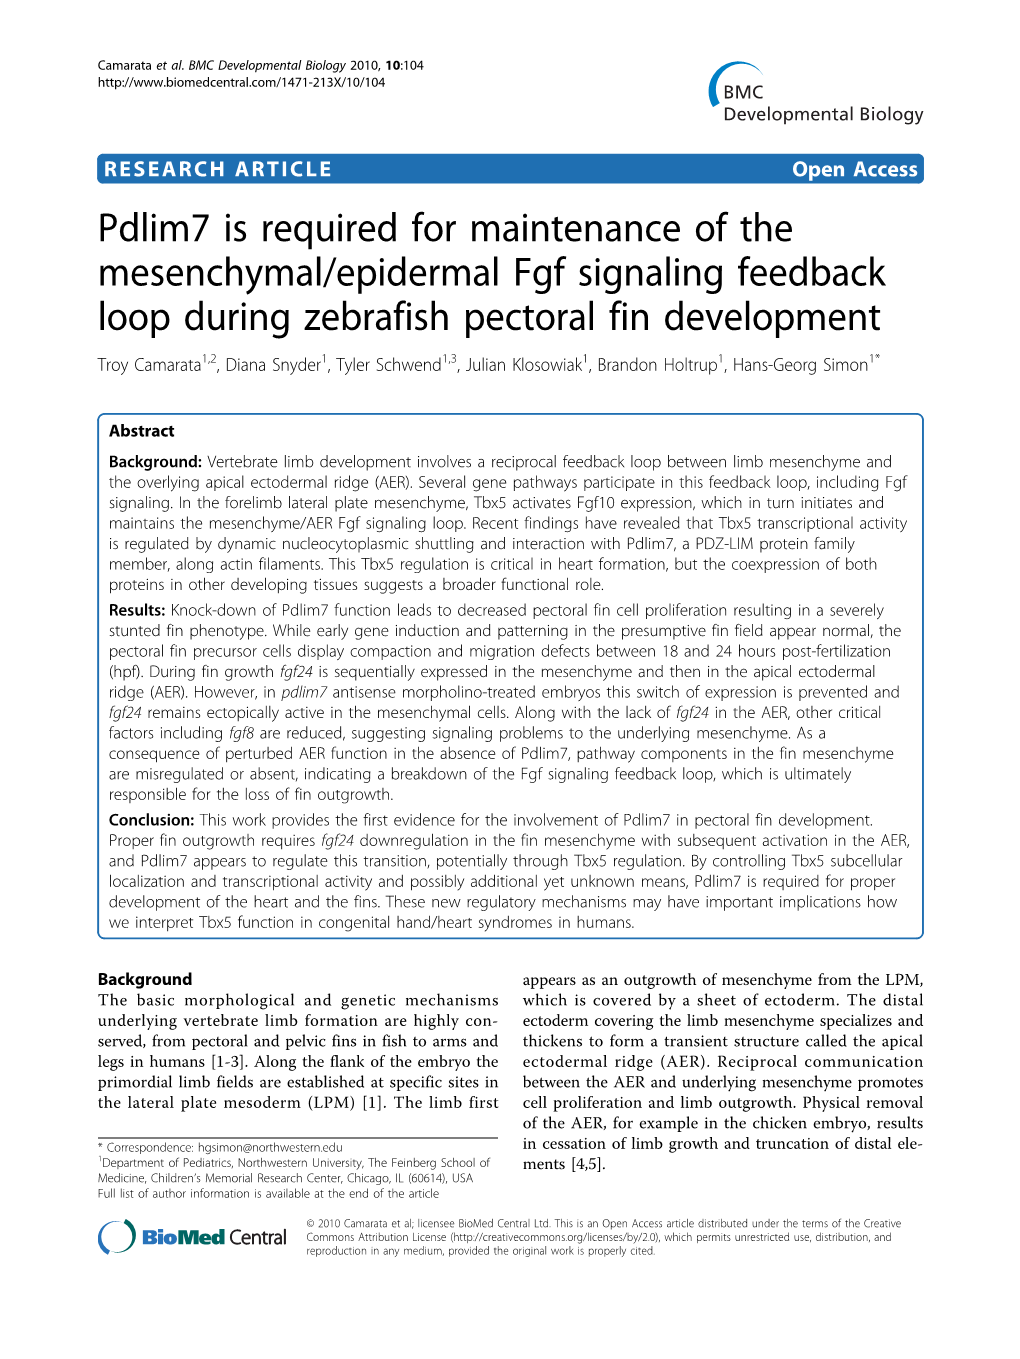 Pdlim7 Is Required for Maintenance of the Mesenchymal/Epidermal Fgf